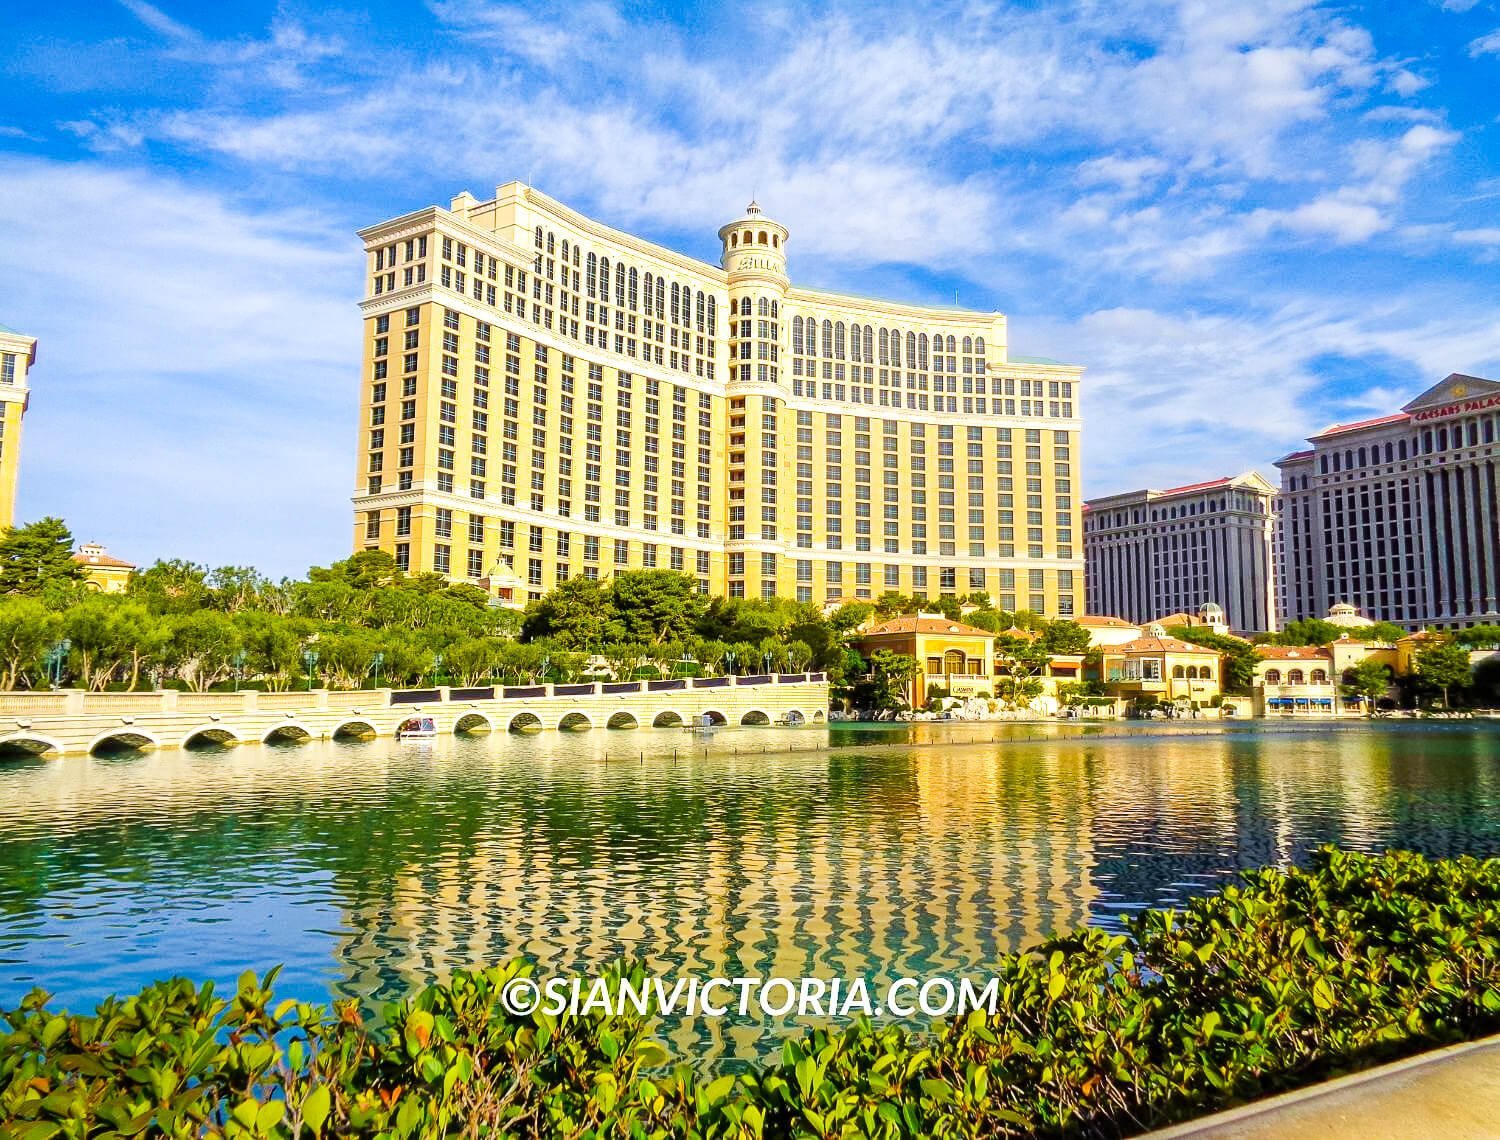 Bellagio Las Vegas: A Guide for Tourists & Guests Visiting — sian